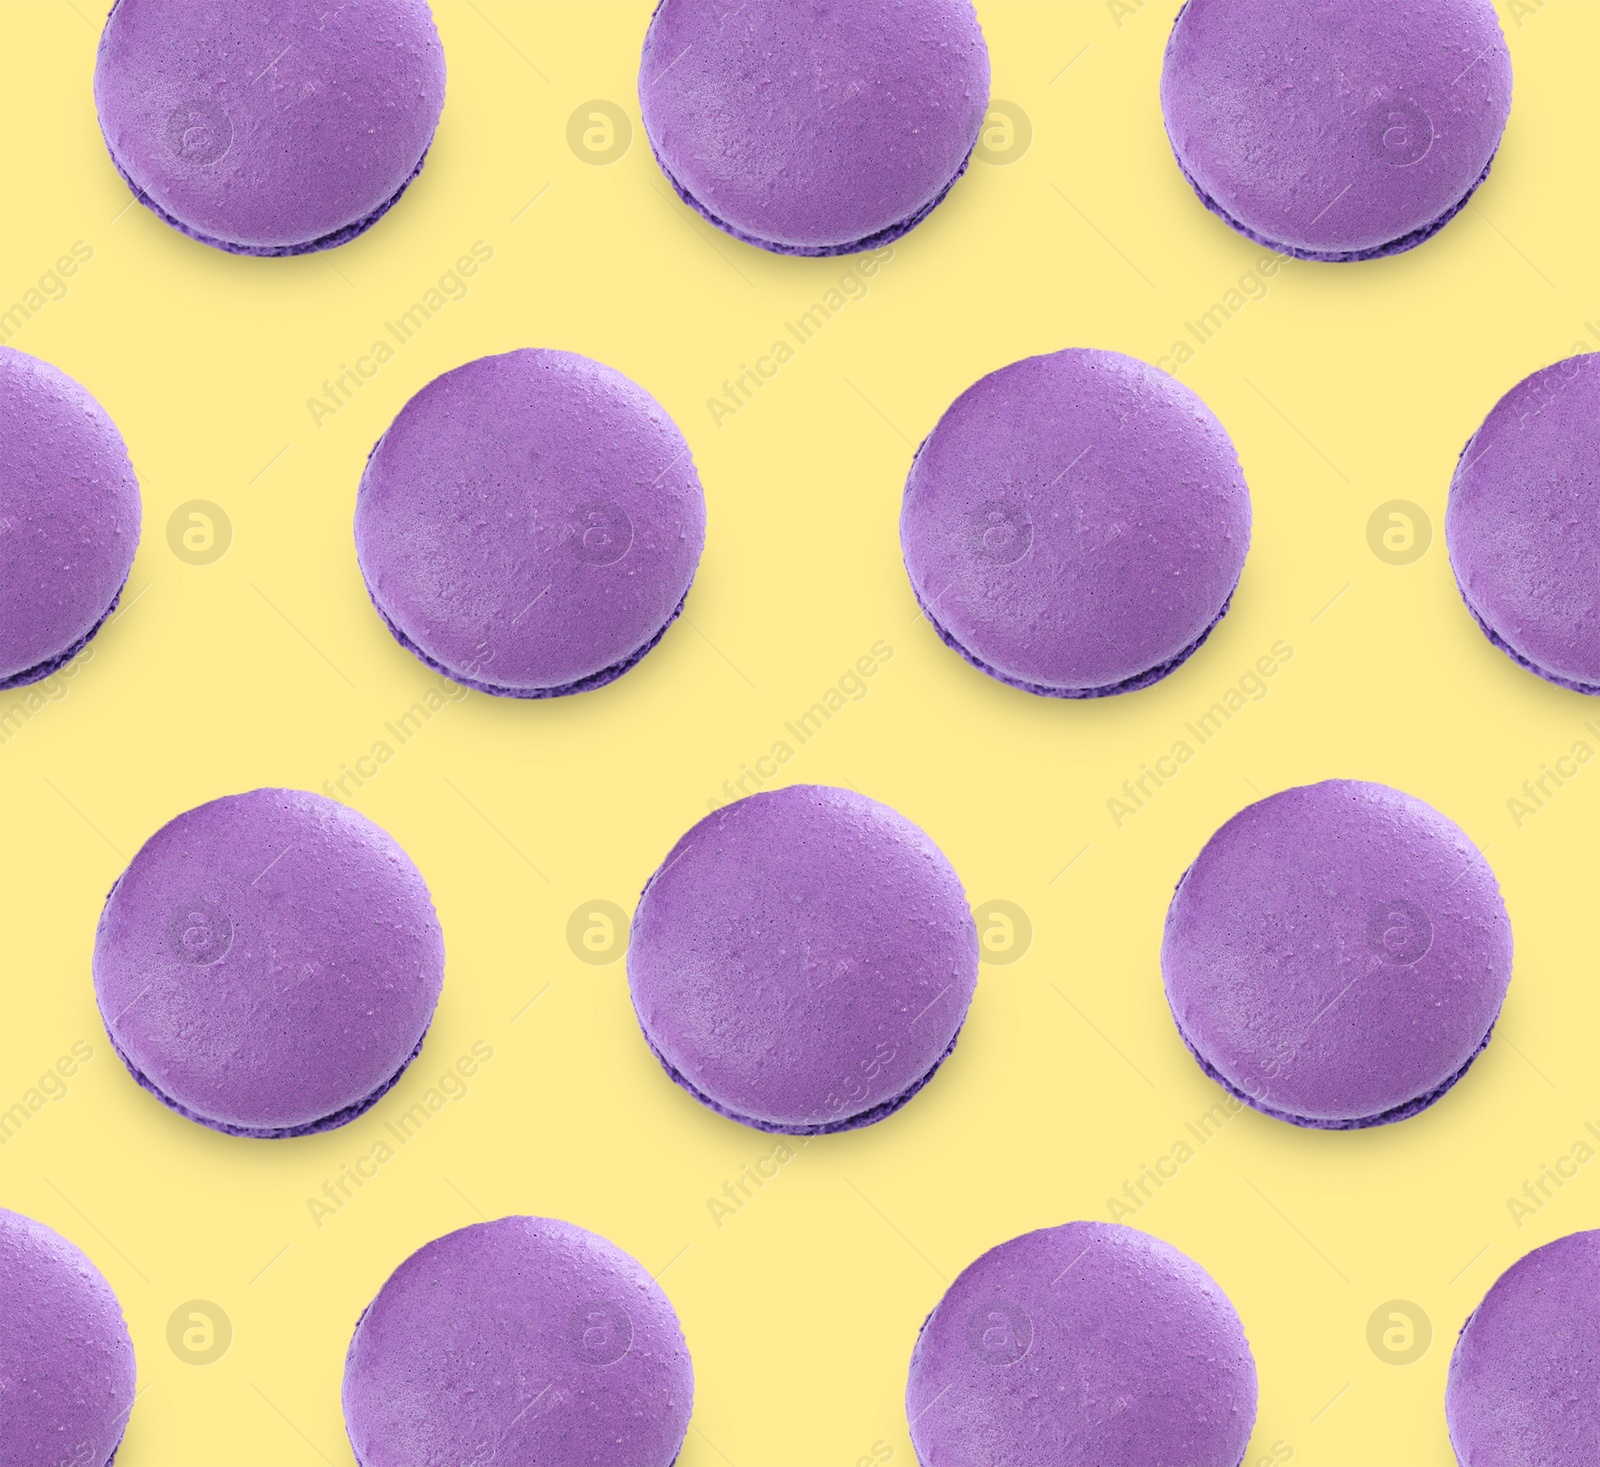 Image of Delicious macarons on yellow background, flat lay 